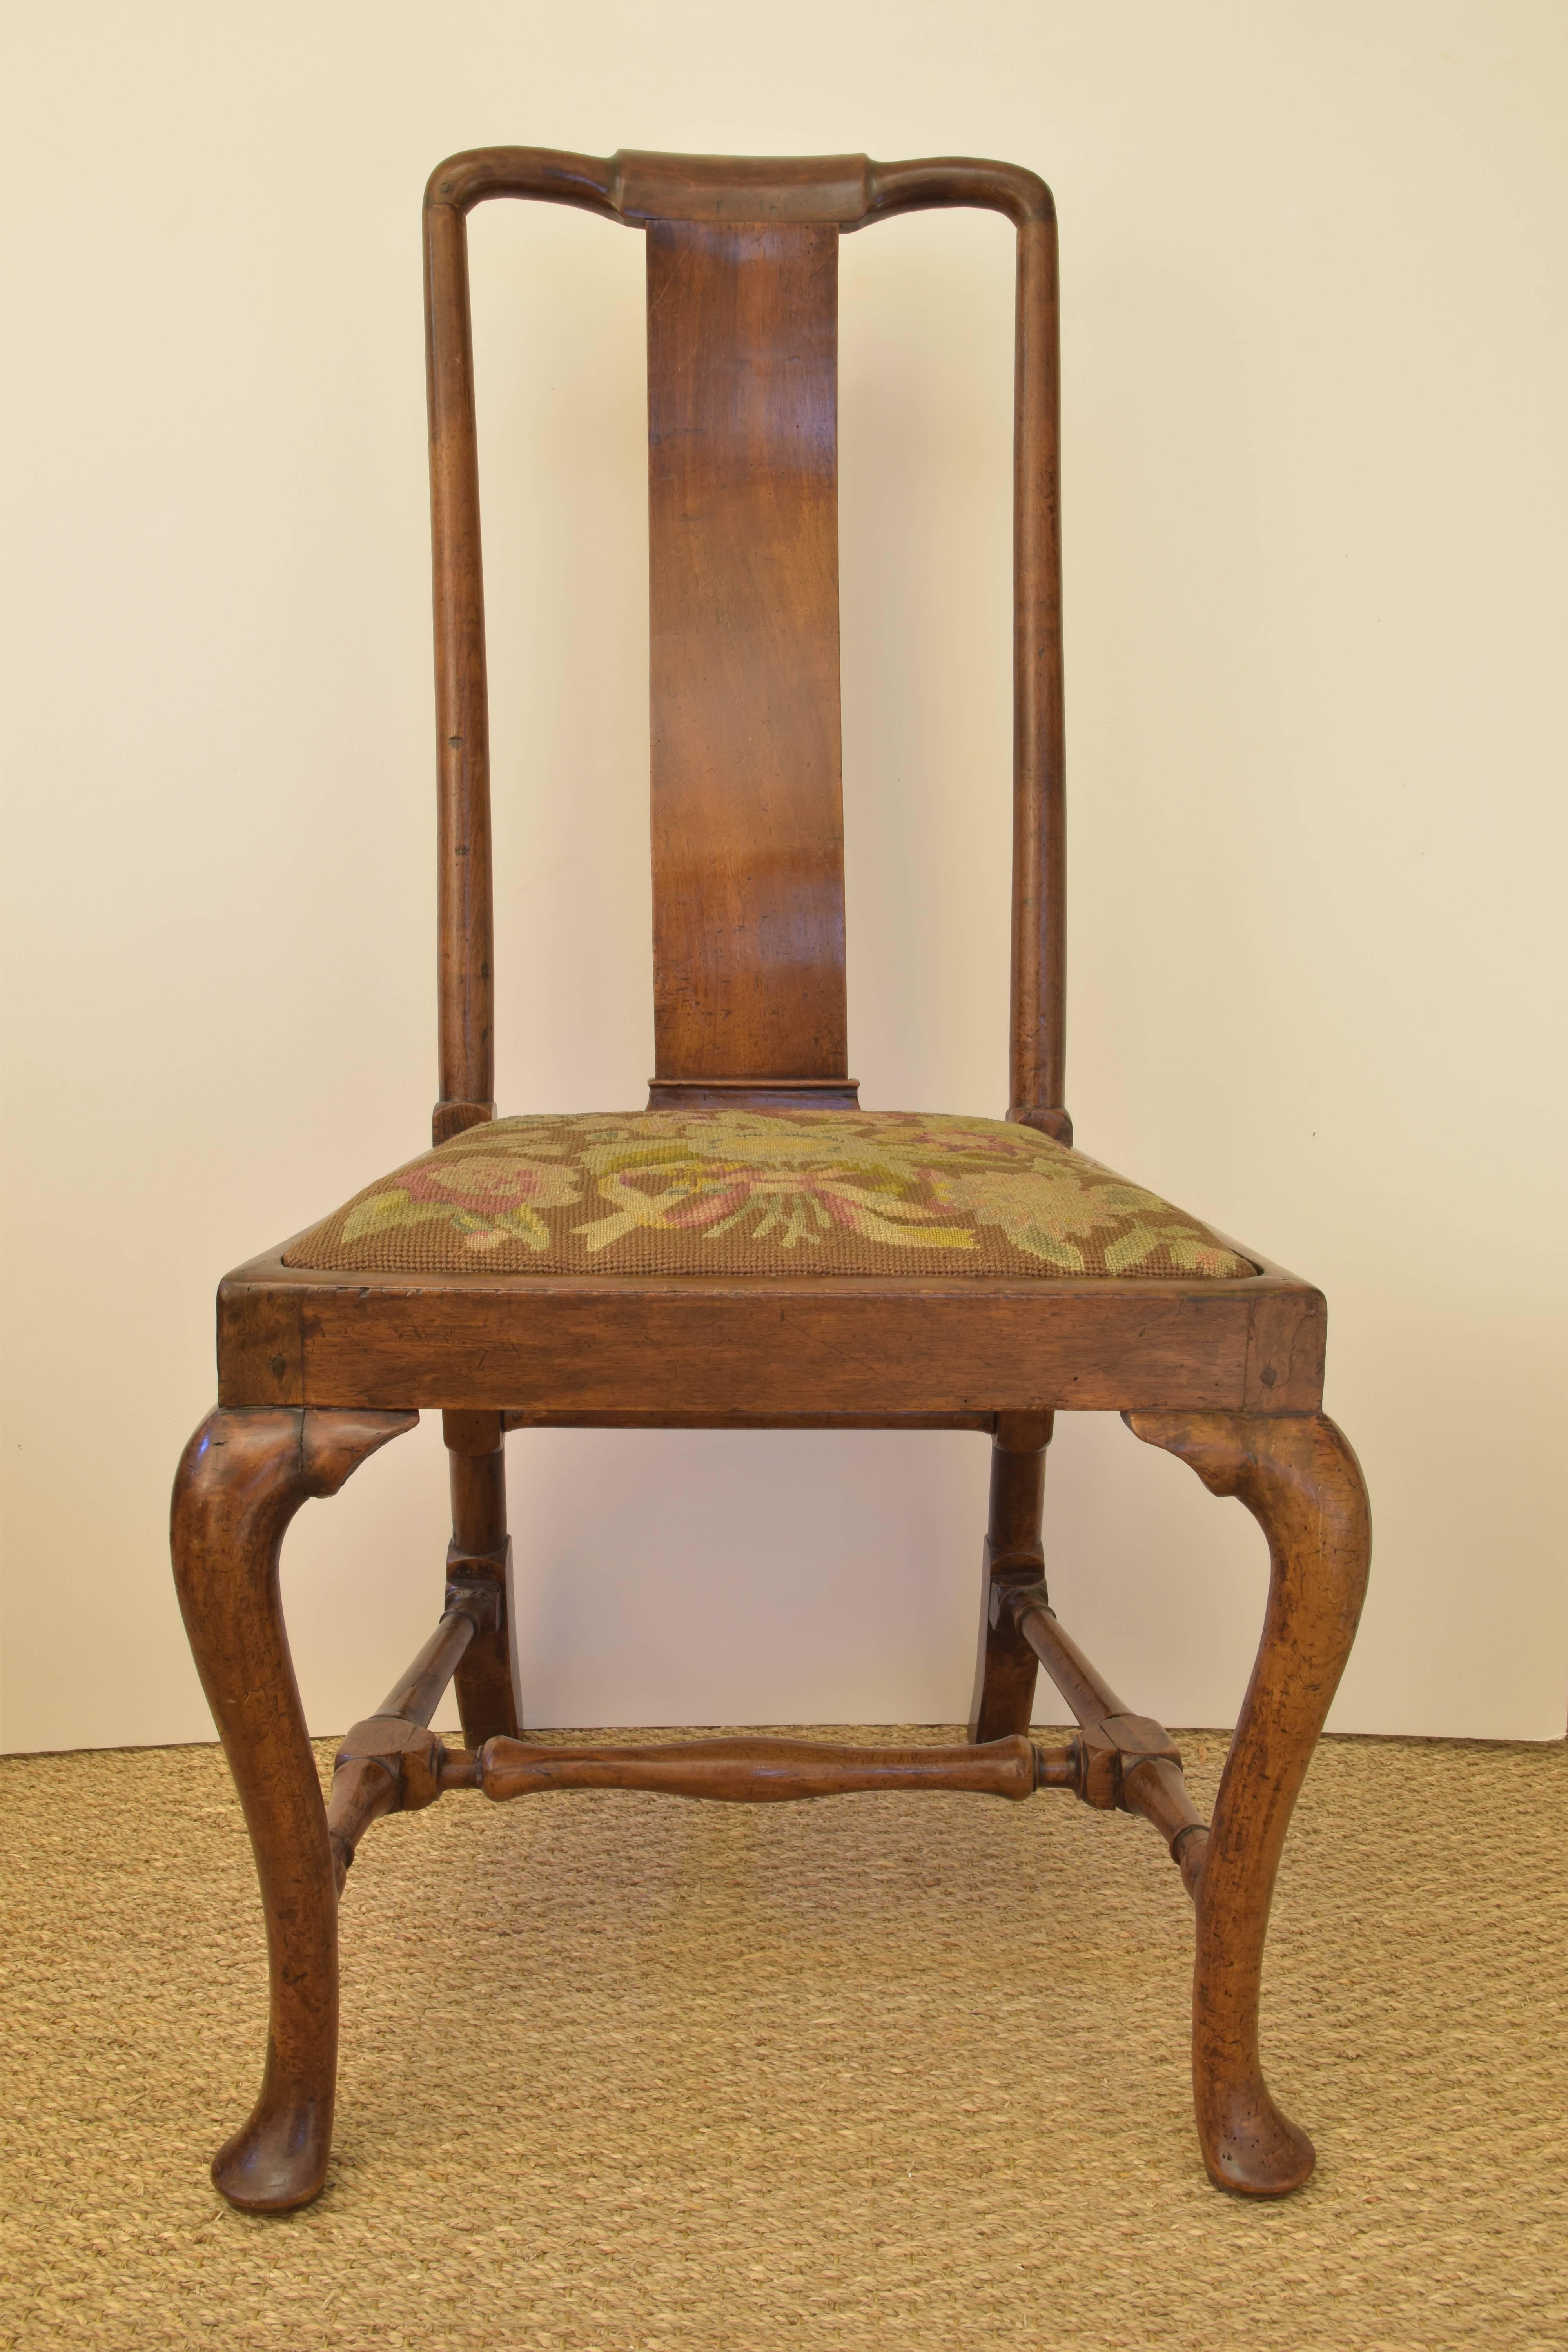 A beautifully proportioned chair with peg construction and an original needlepoint seat.